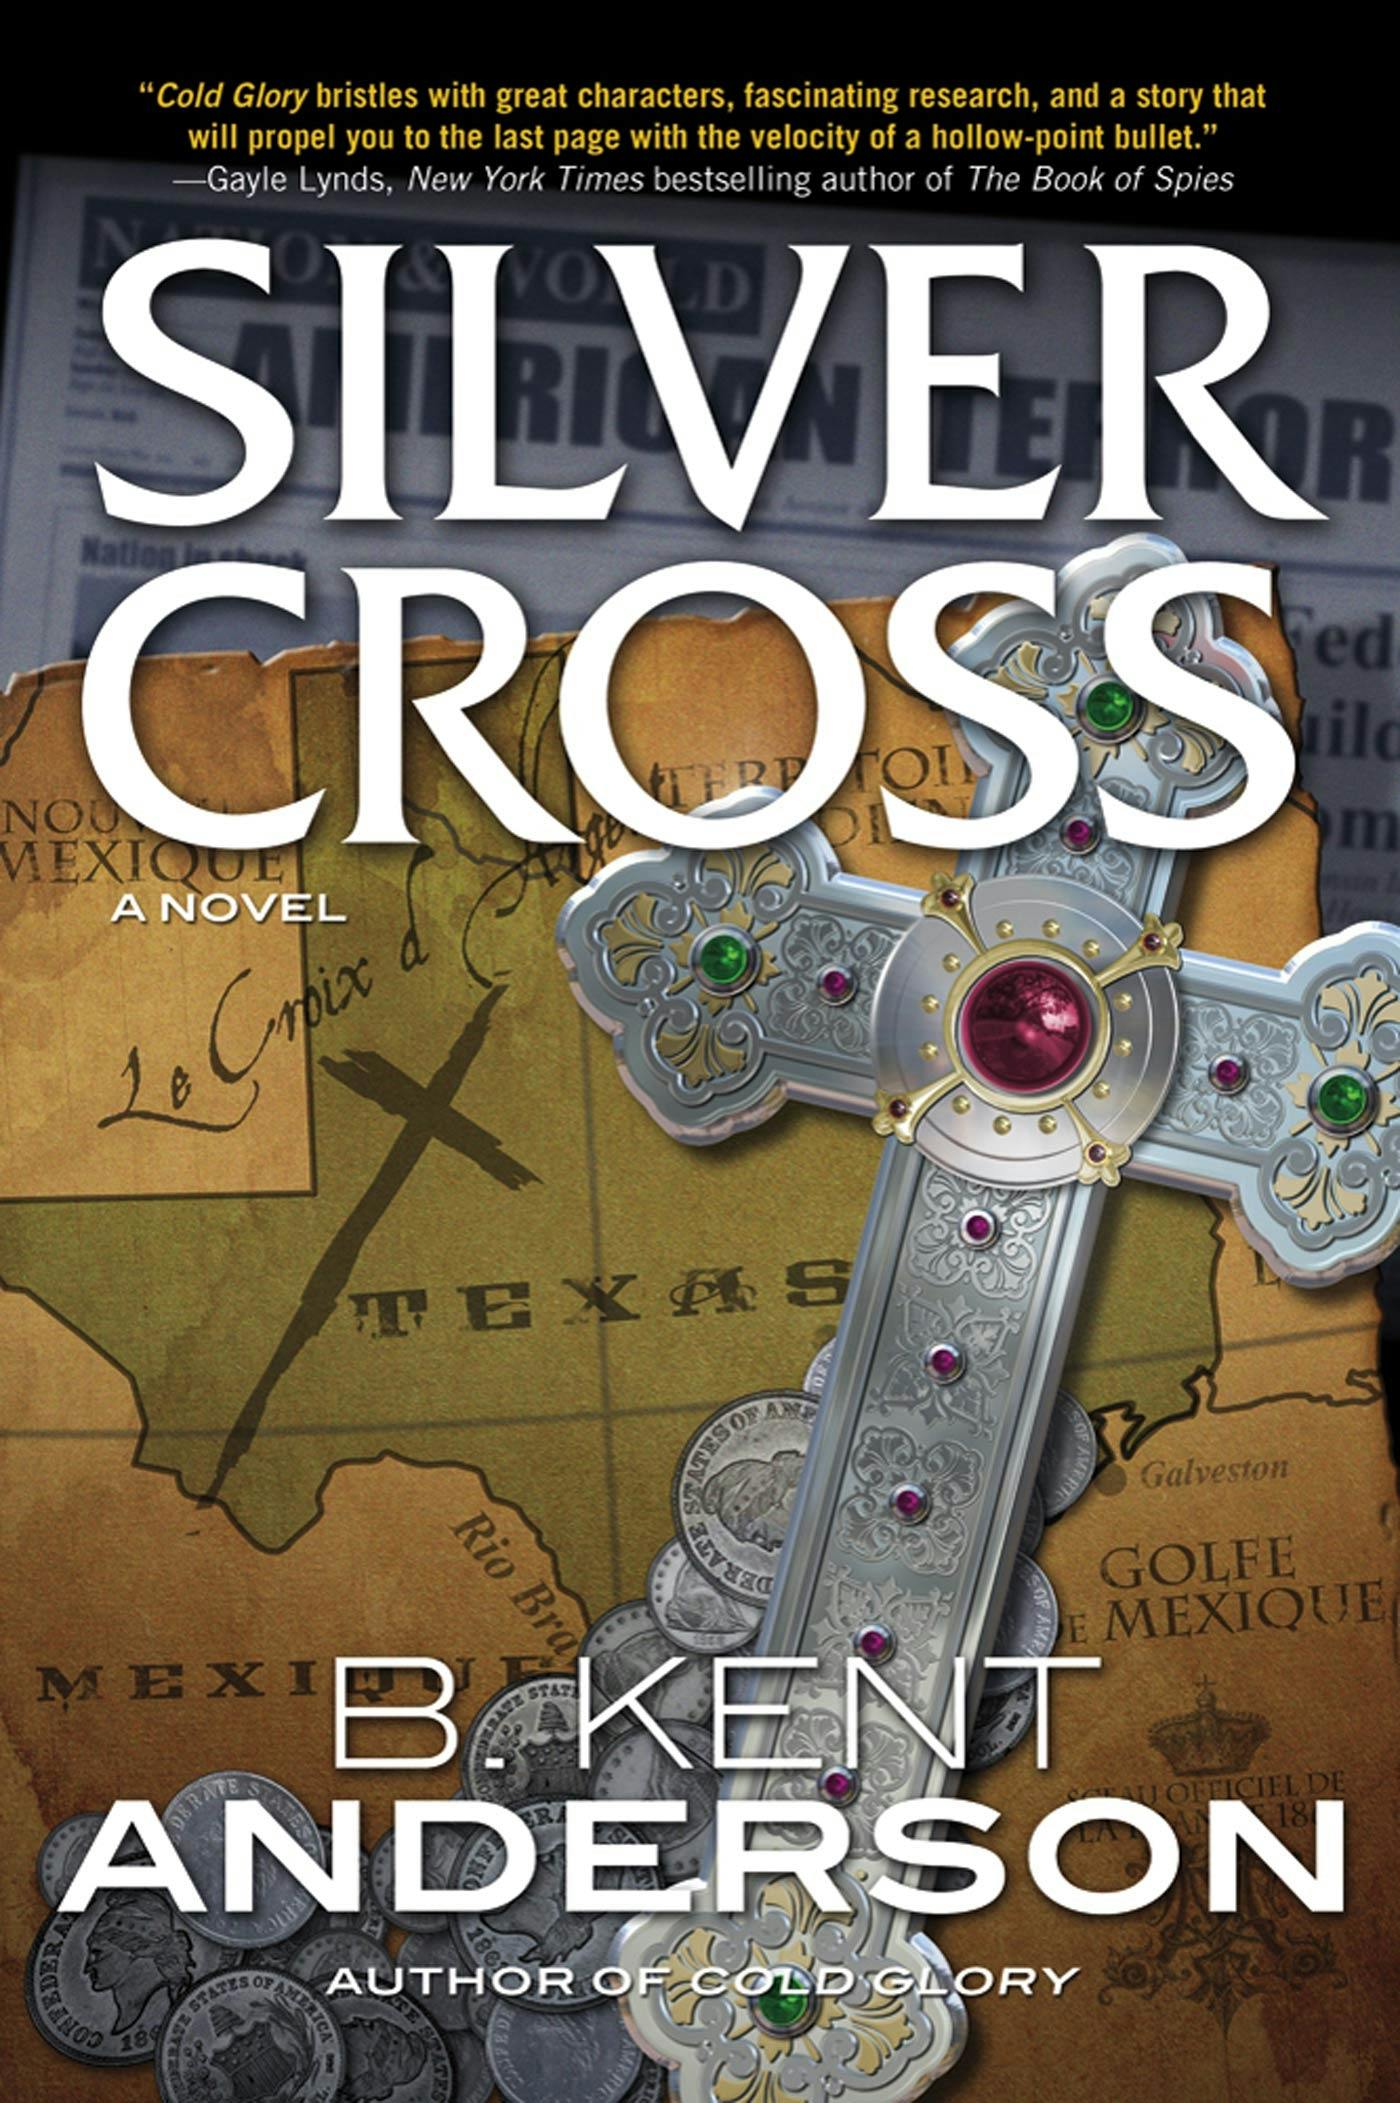 Cover for the book titled as: Silver Cross